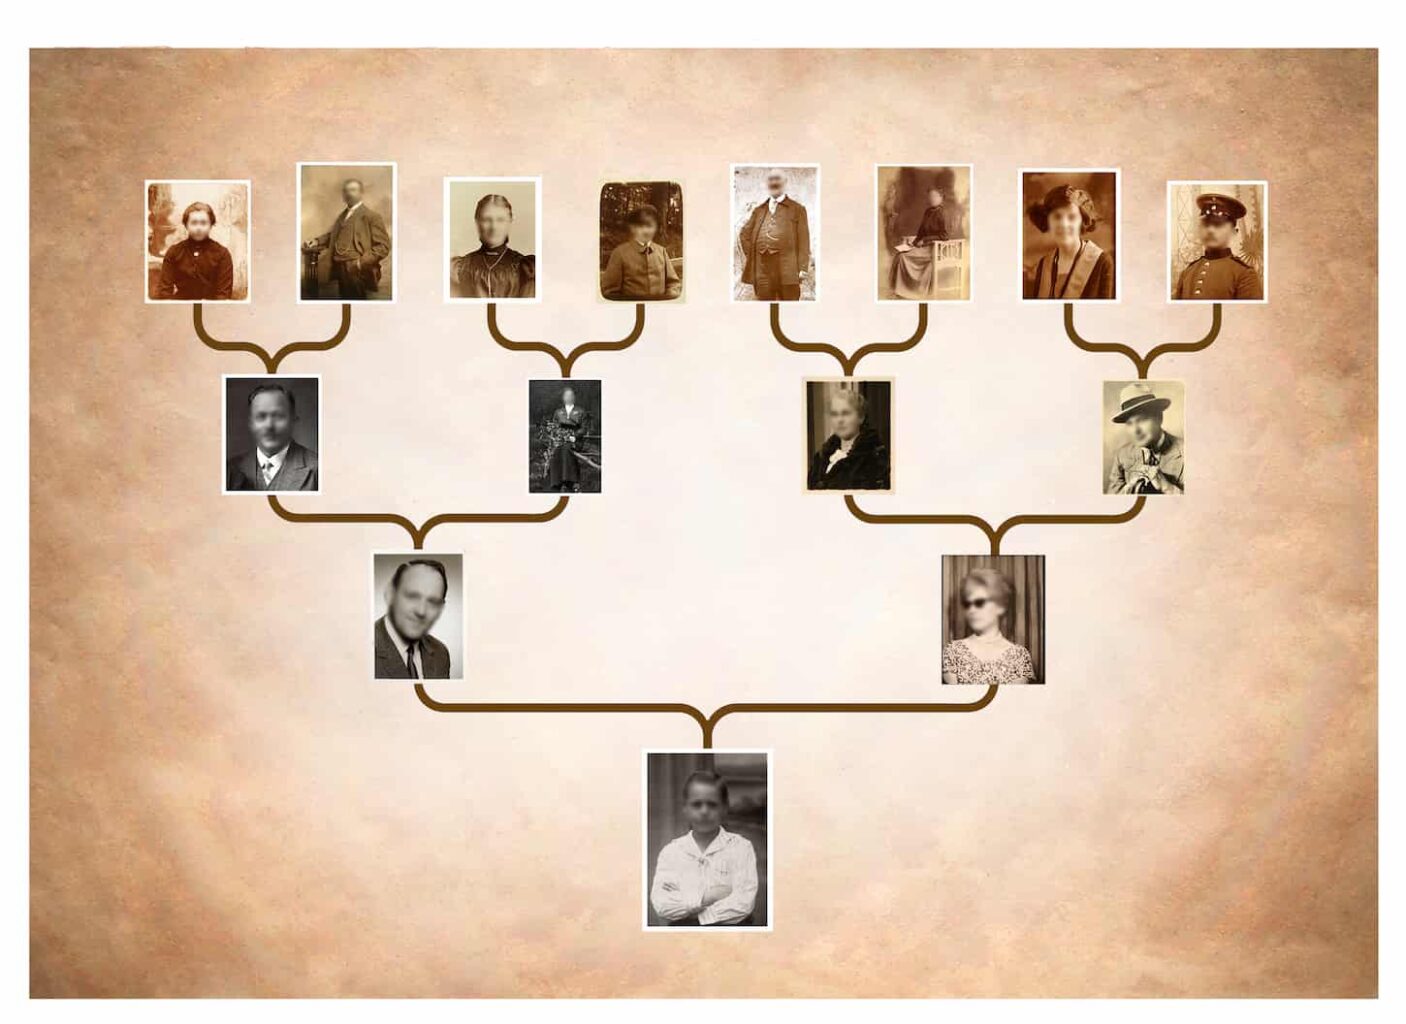 An image of a family tree on a sepia background.